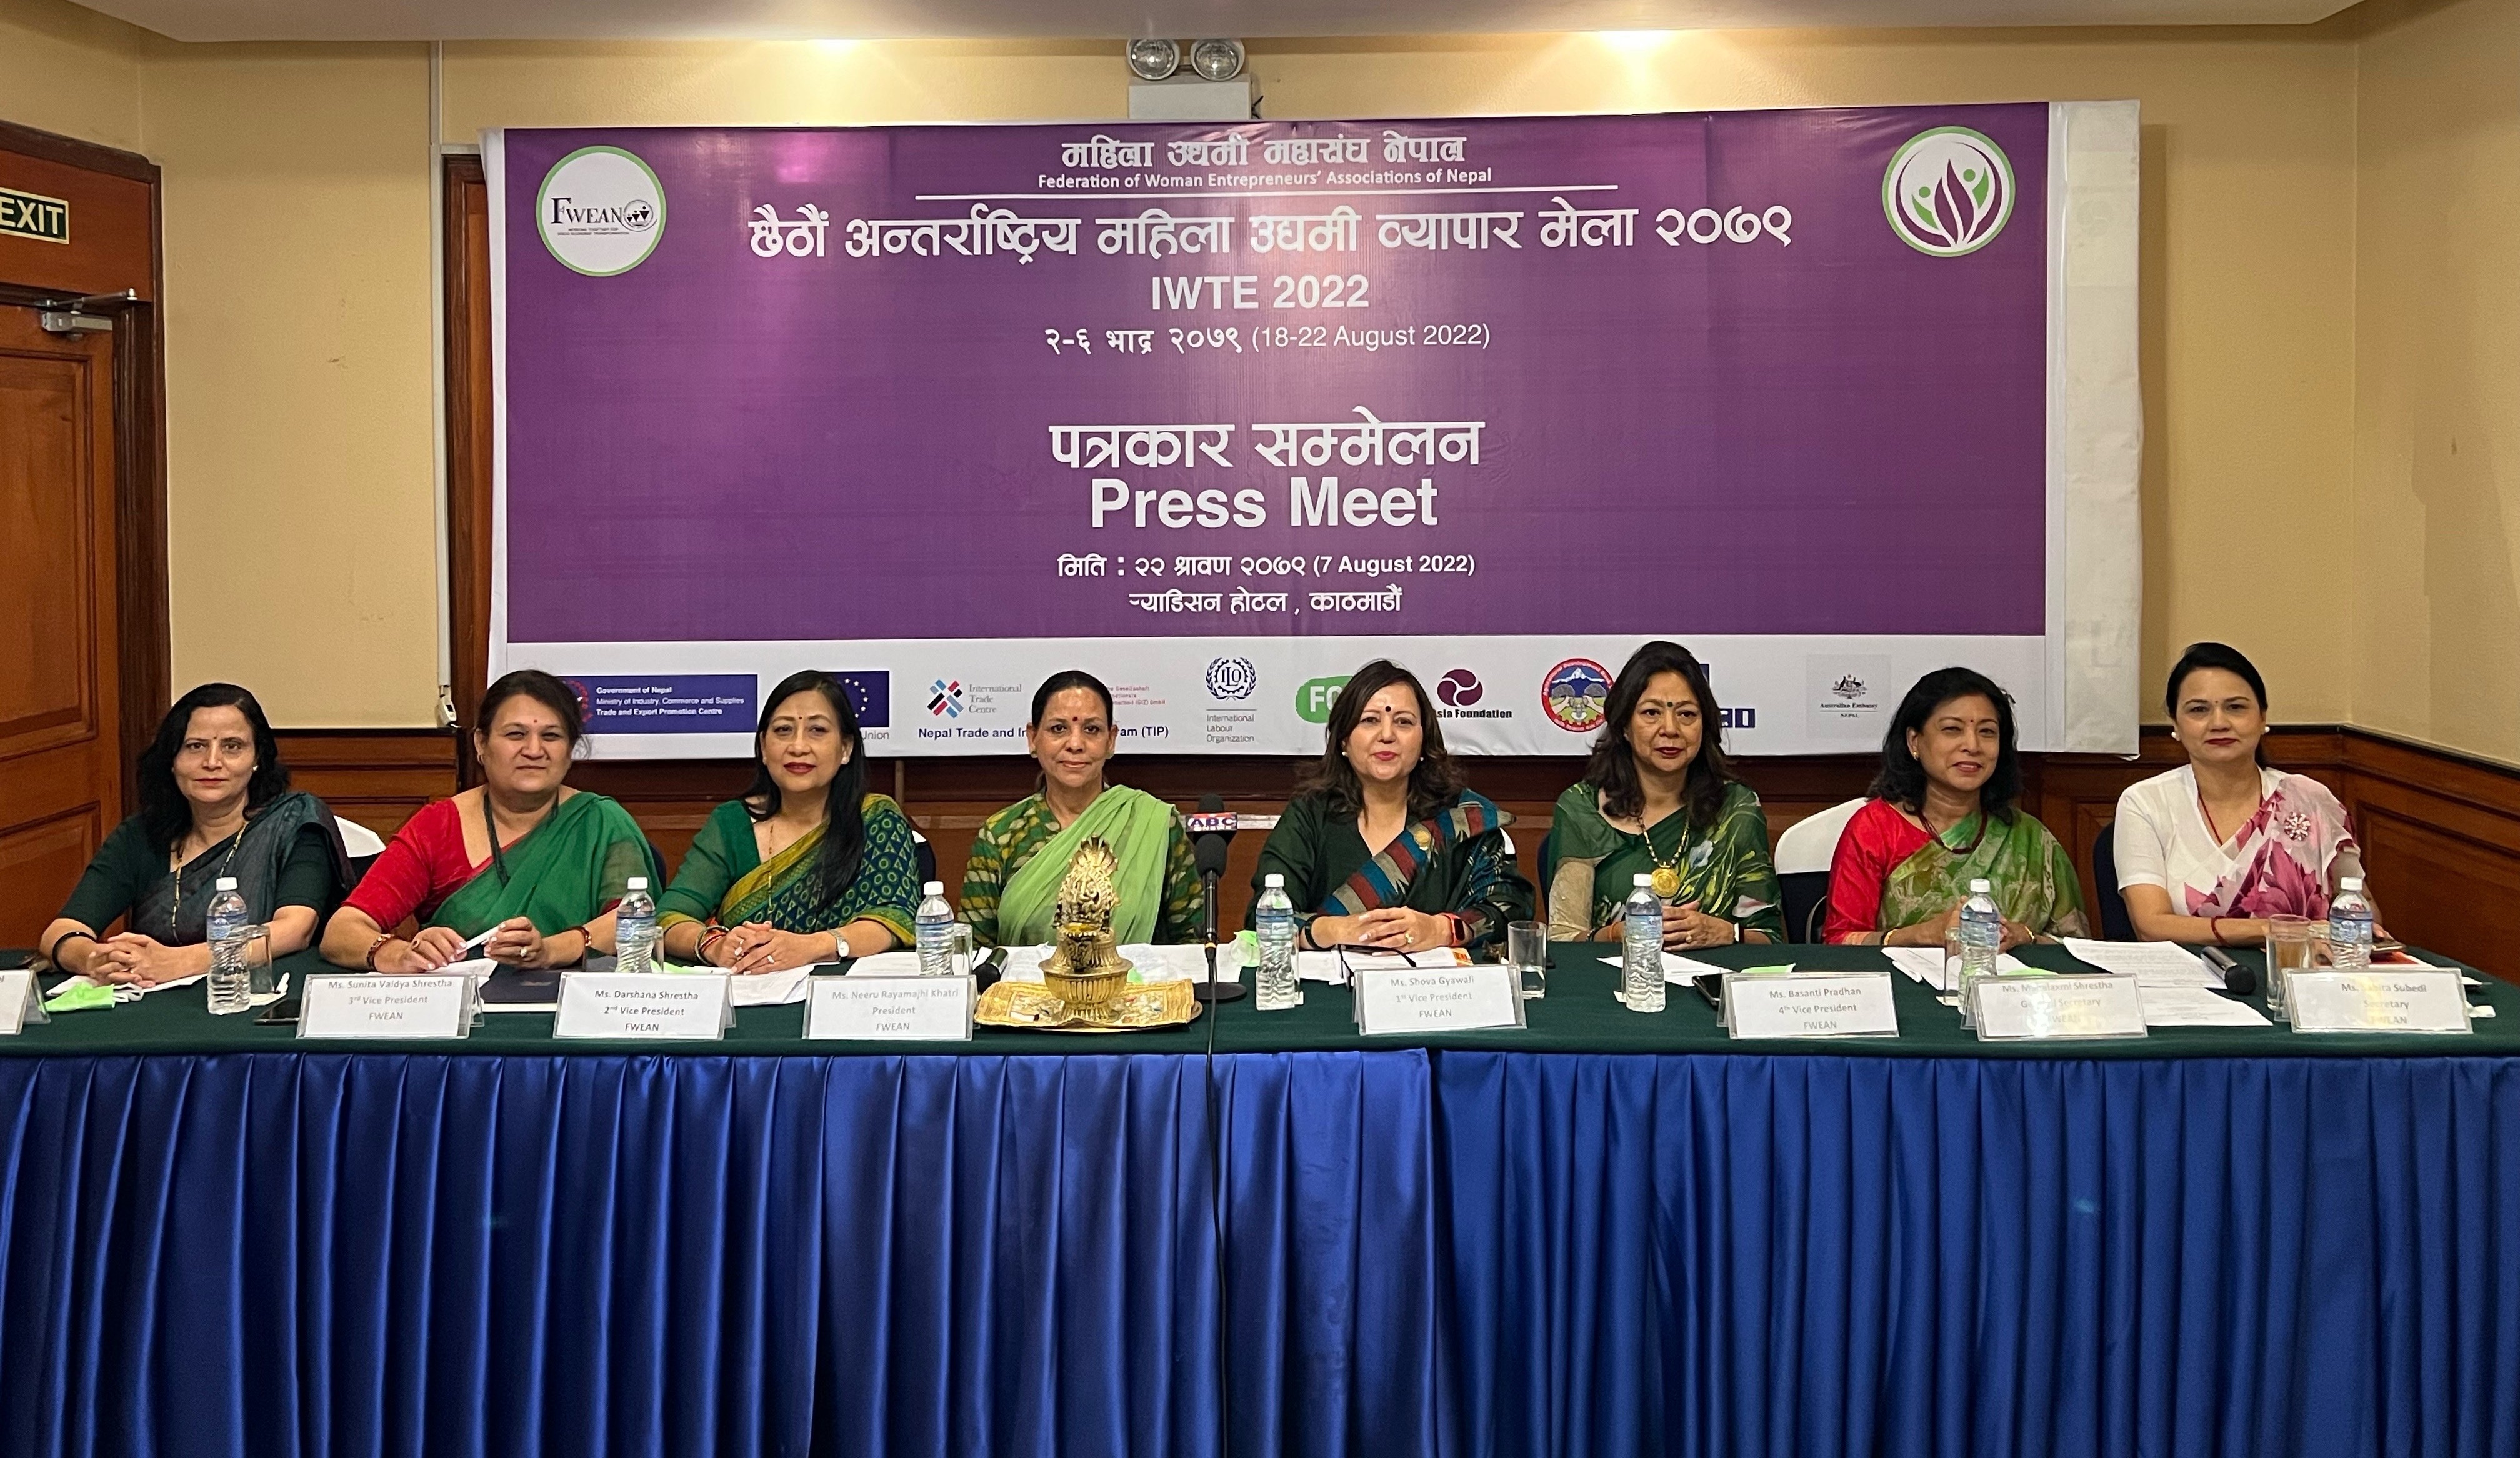 Sixth Int'l Women Entrepreneurs Trade Fair to be held from August 18 to 22 in Lalitpur